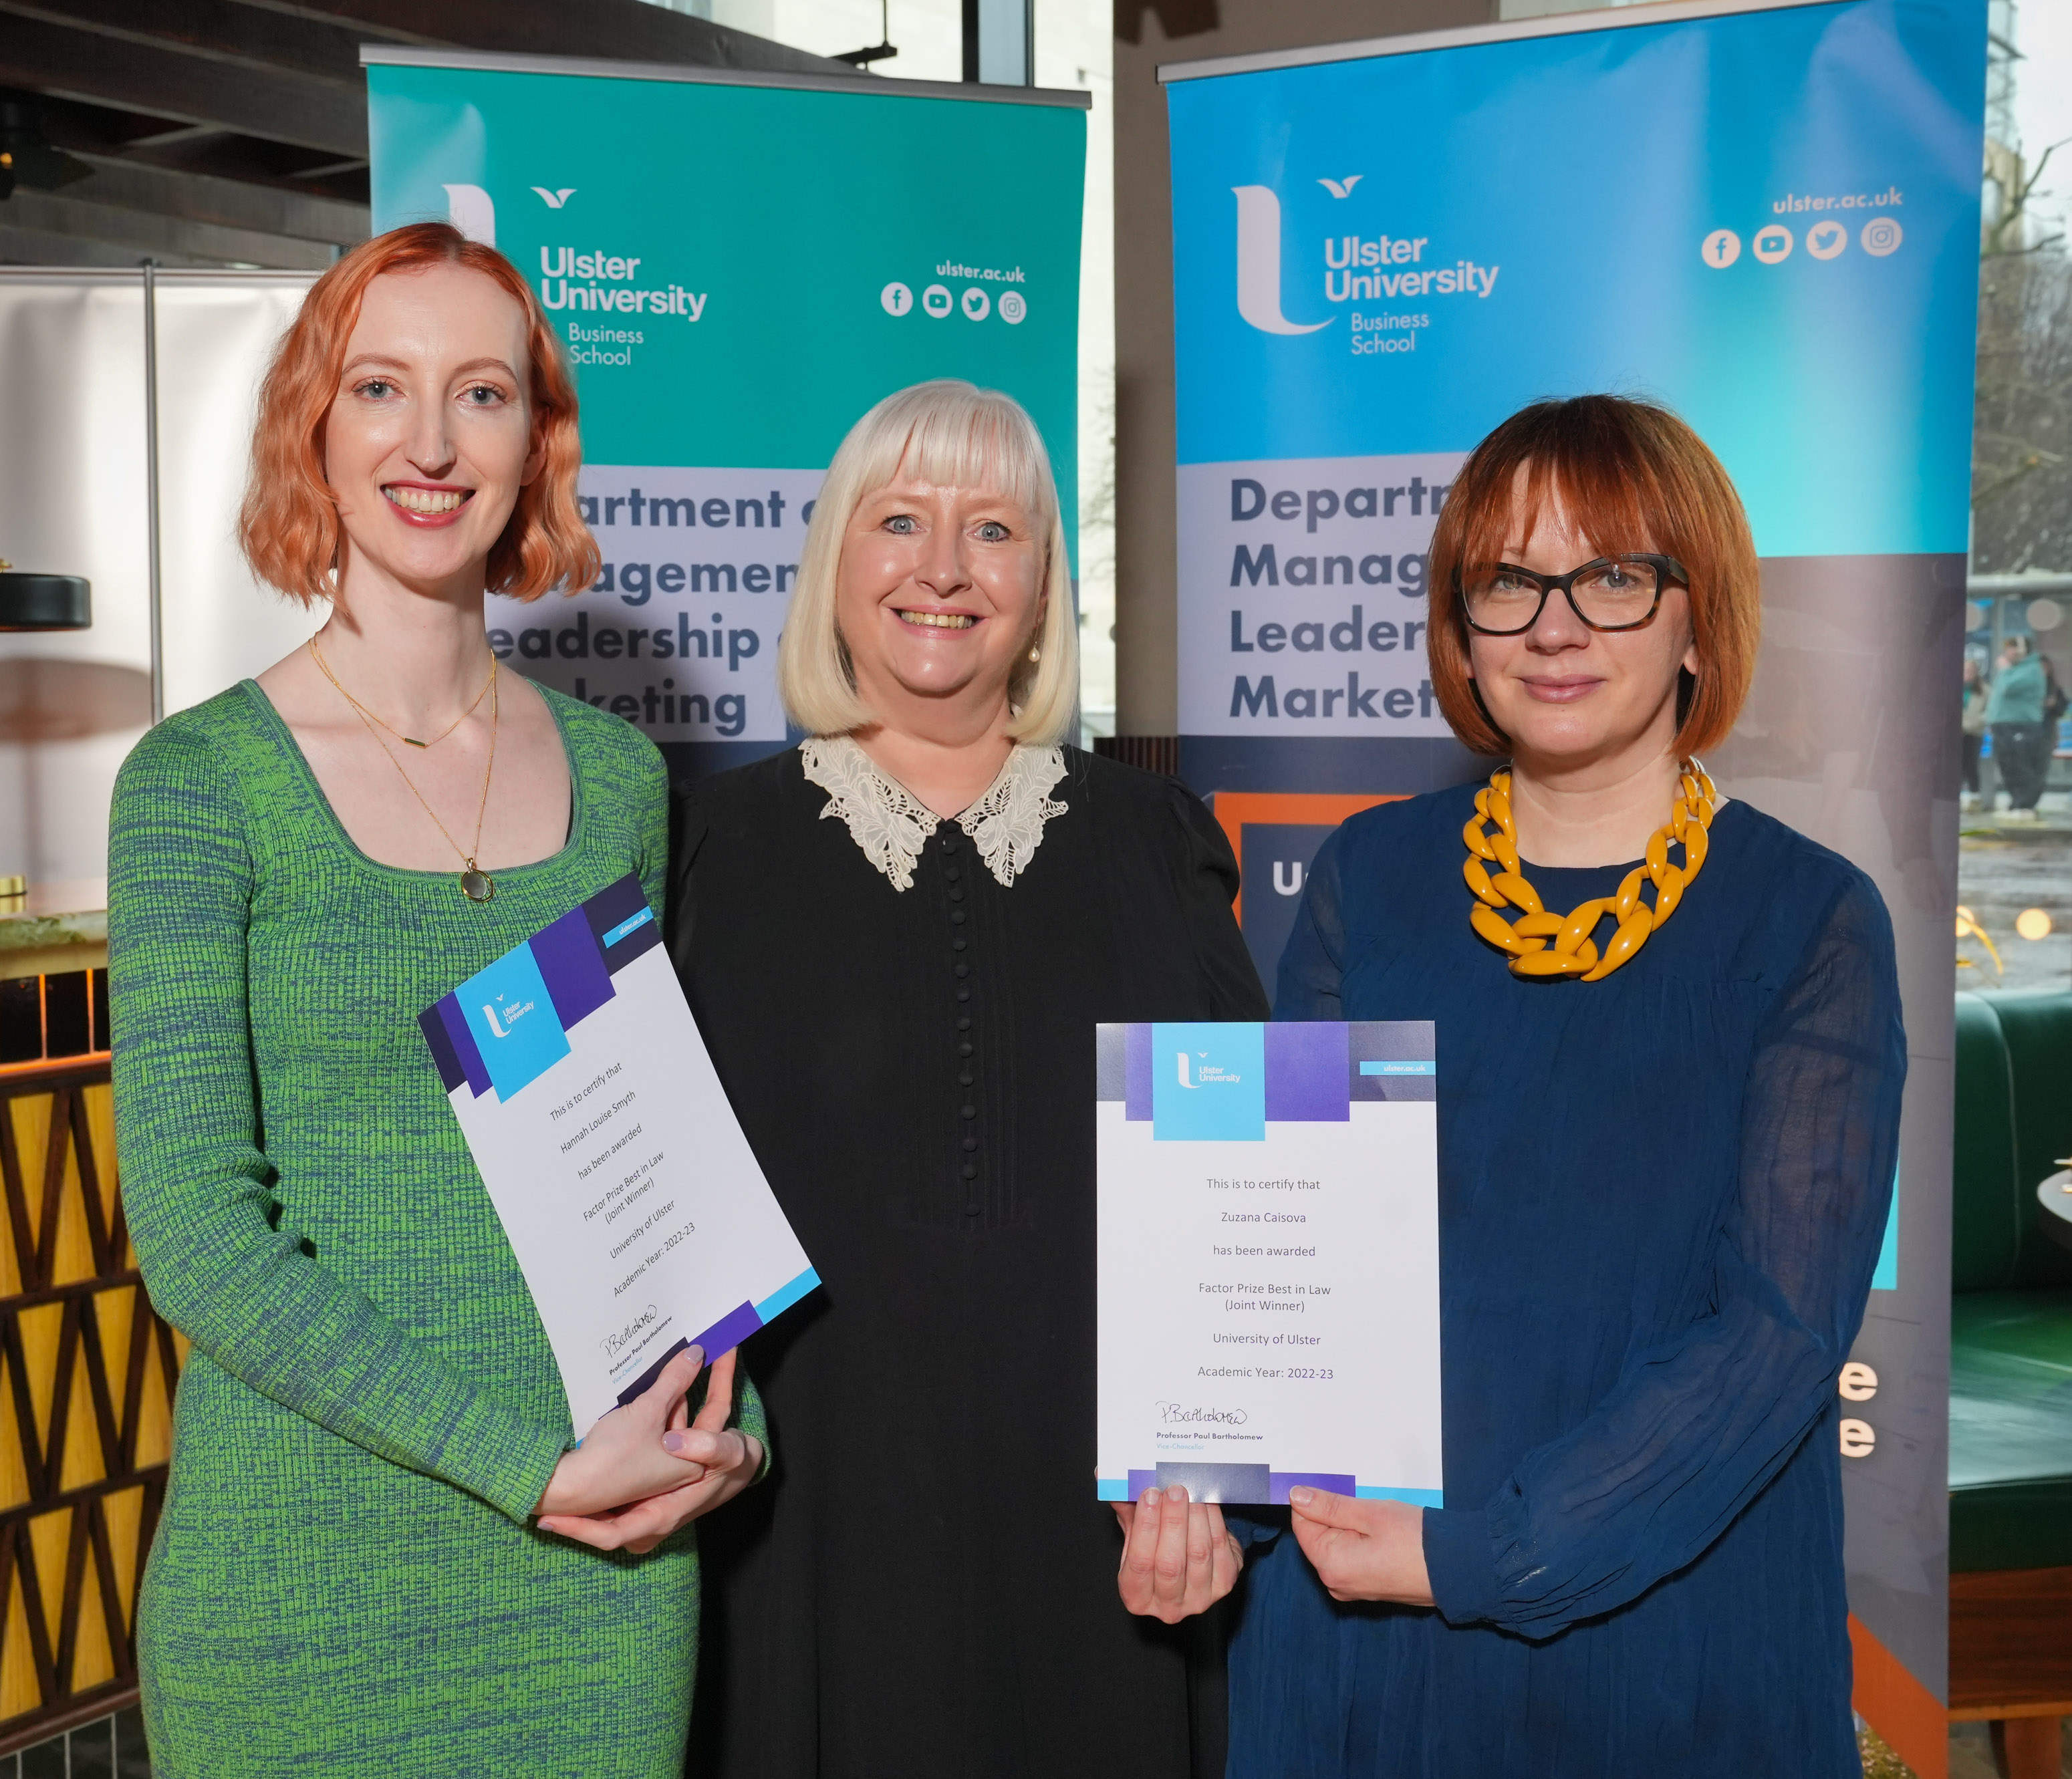 Students awarded for law module success at Ulster University